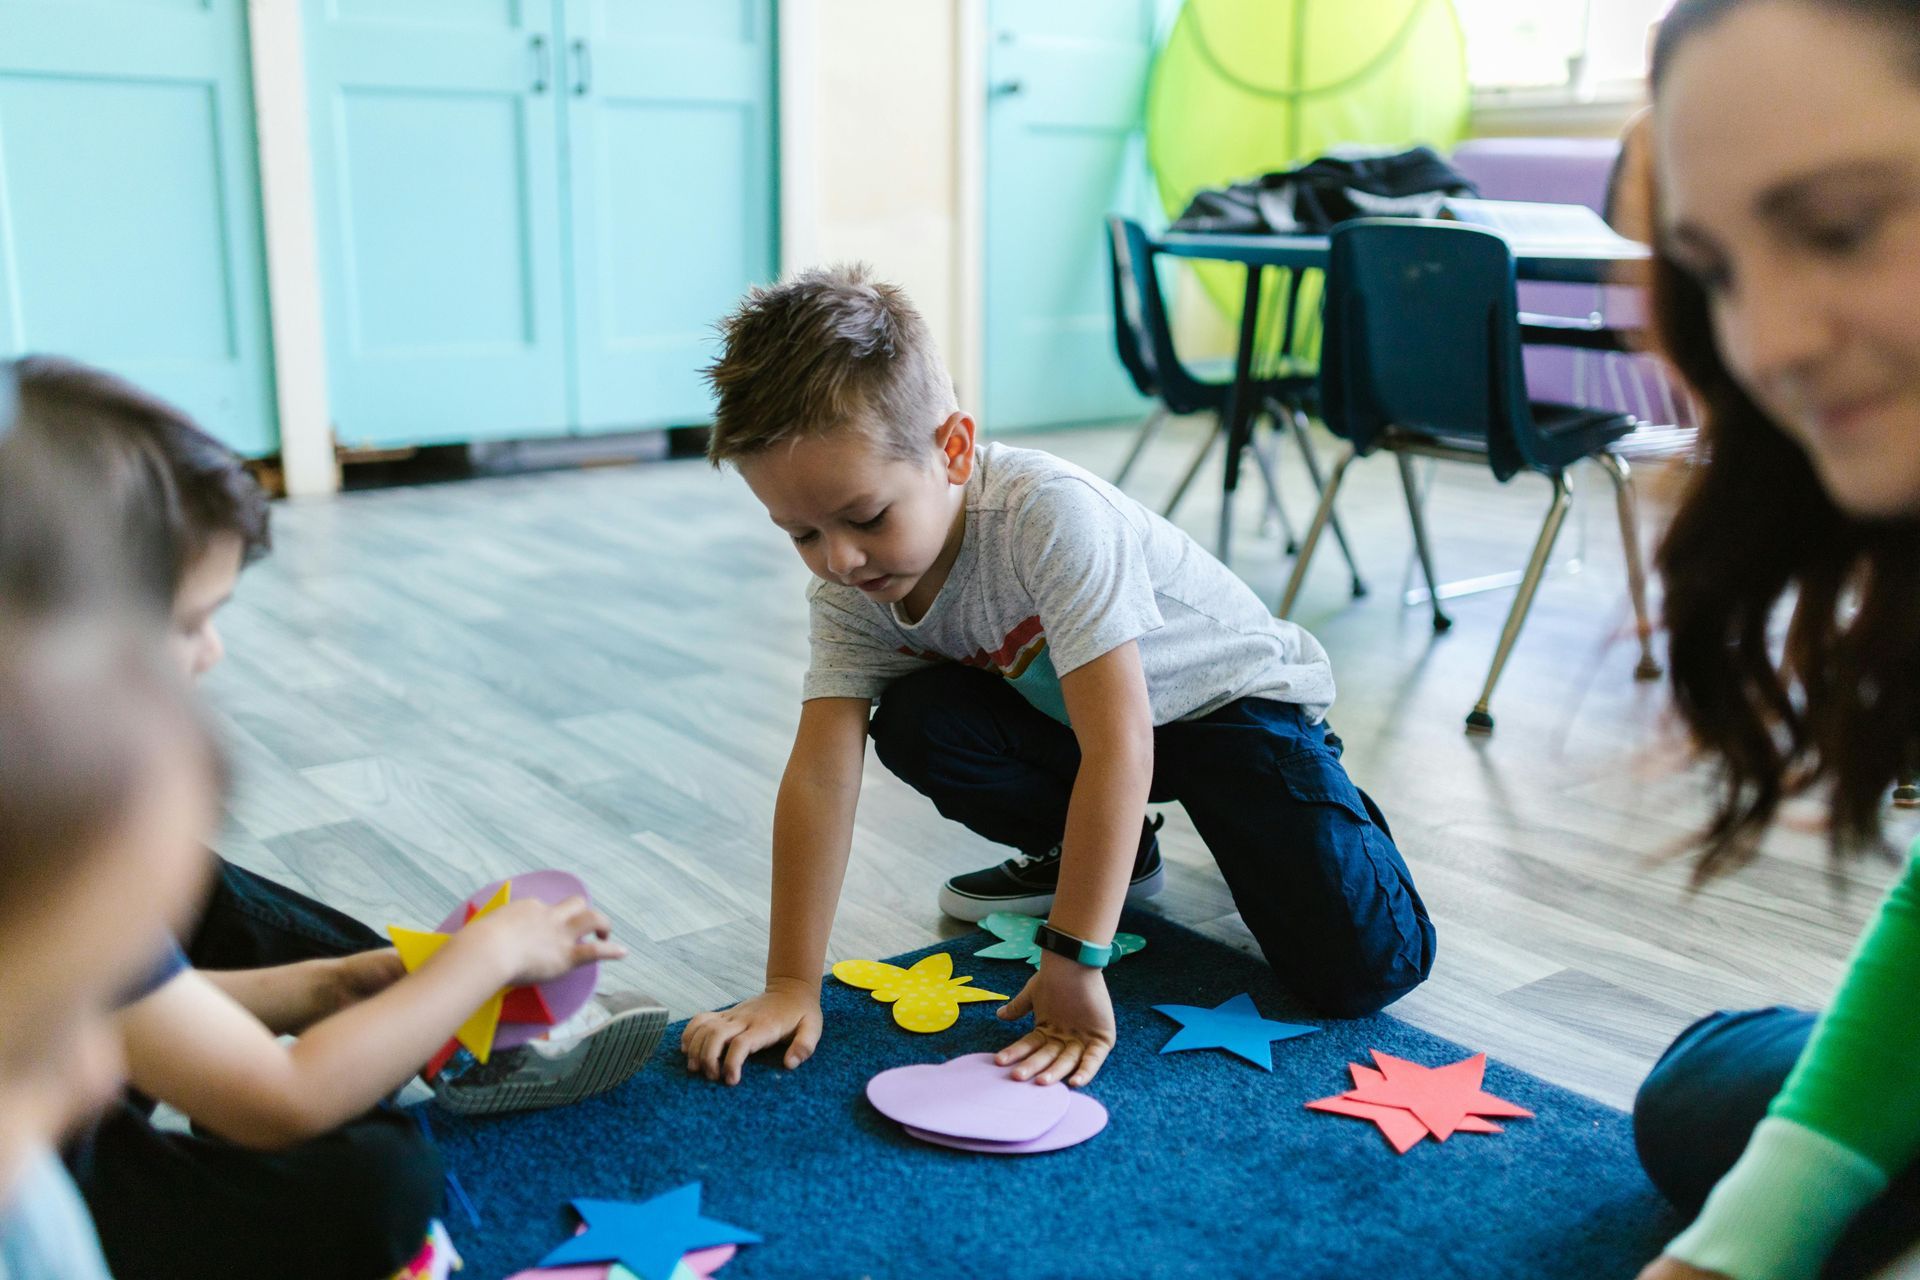 A group of children are playing with paper stars on the floor.